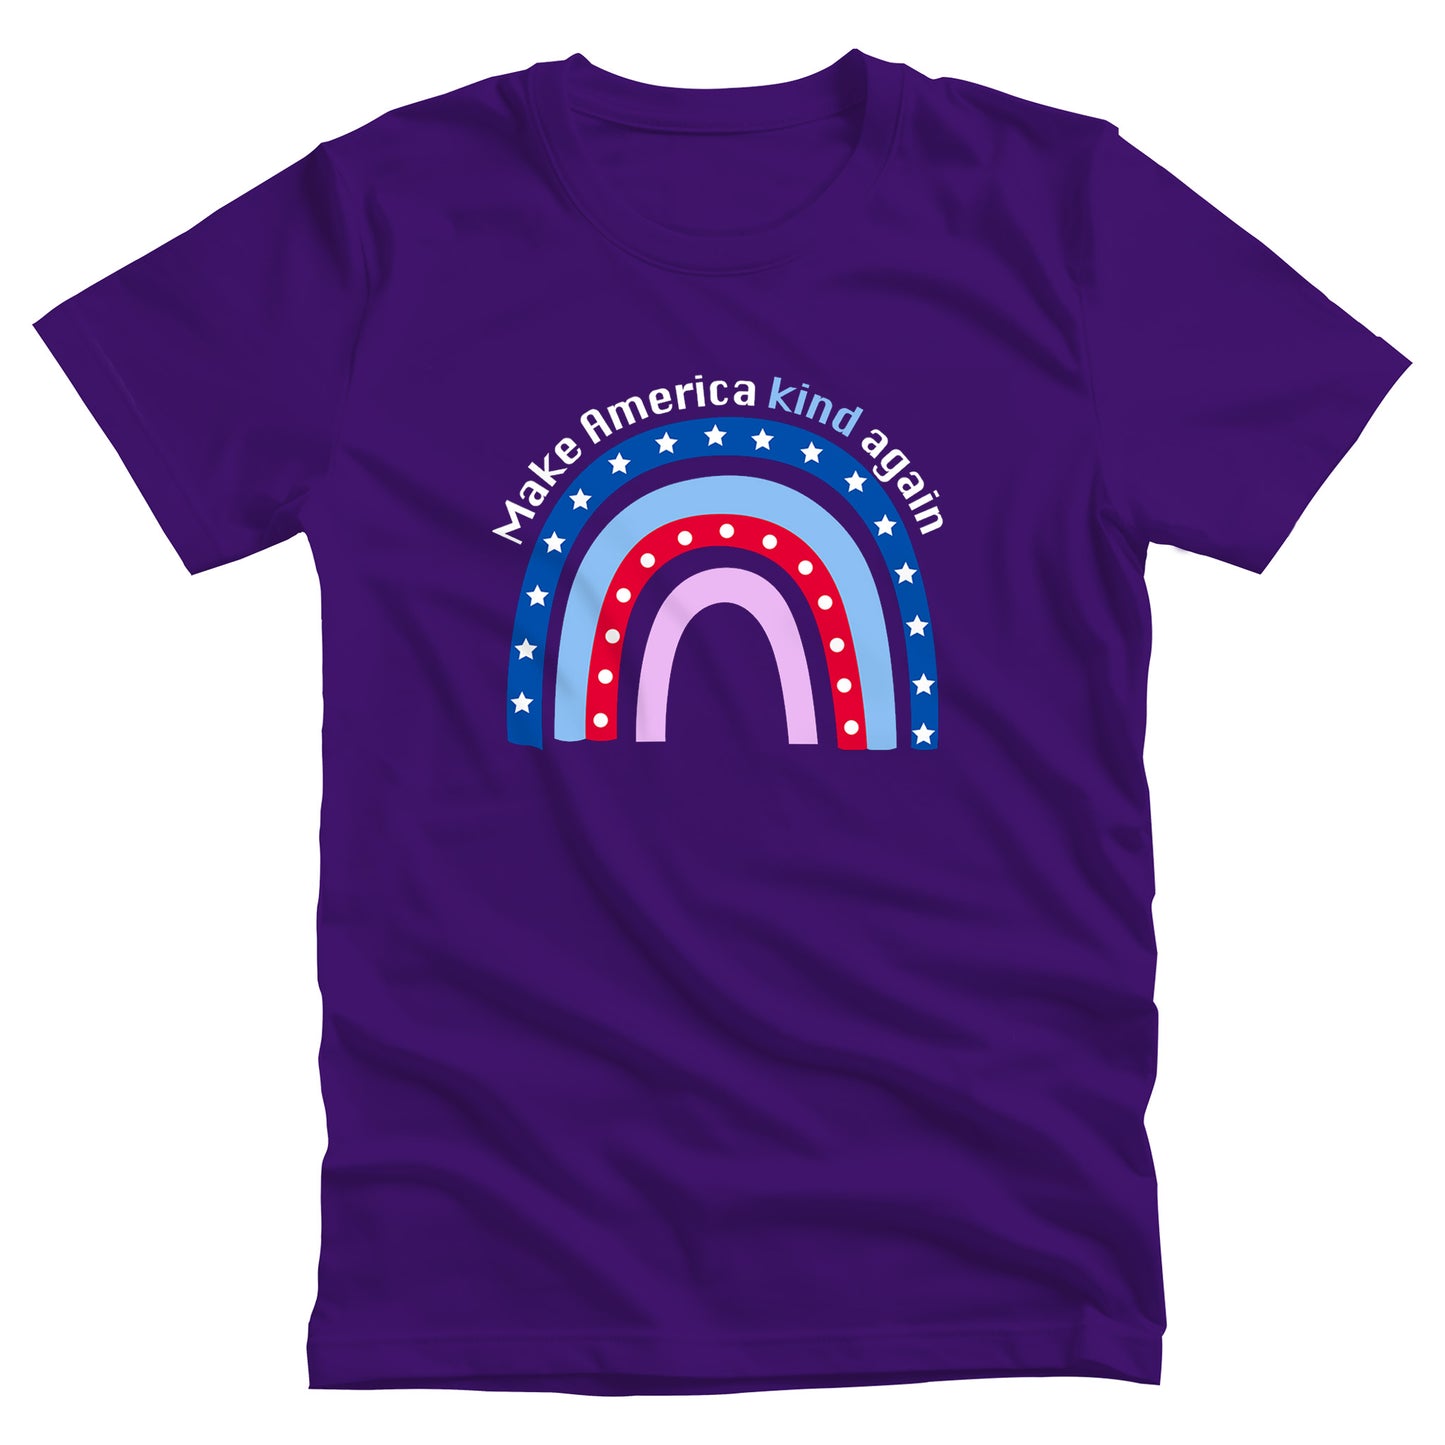 Team Purple color unisex t-shirt with a graphic of a red and blue rainbow with text arched over the top that says, “Make America Kind Again”.